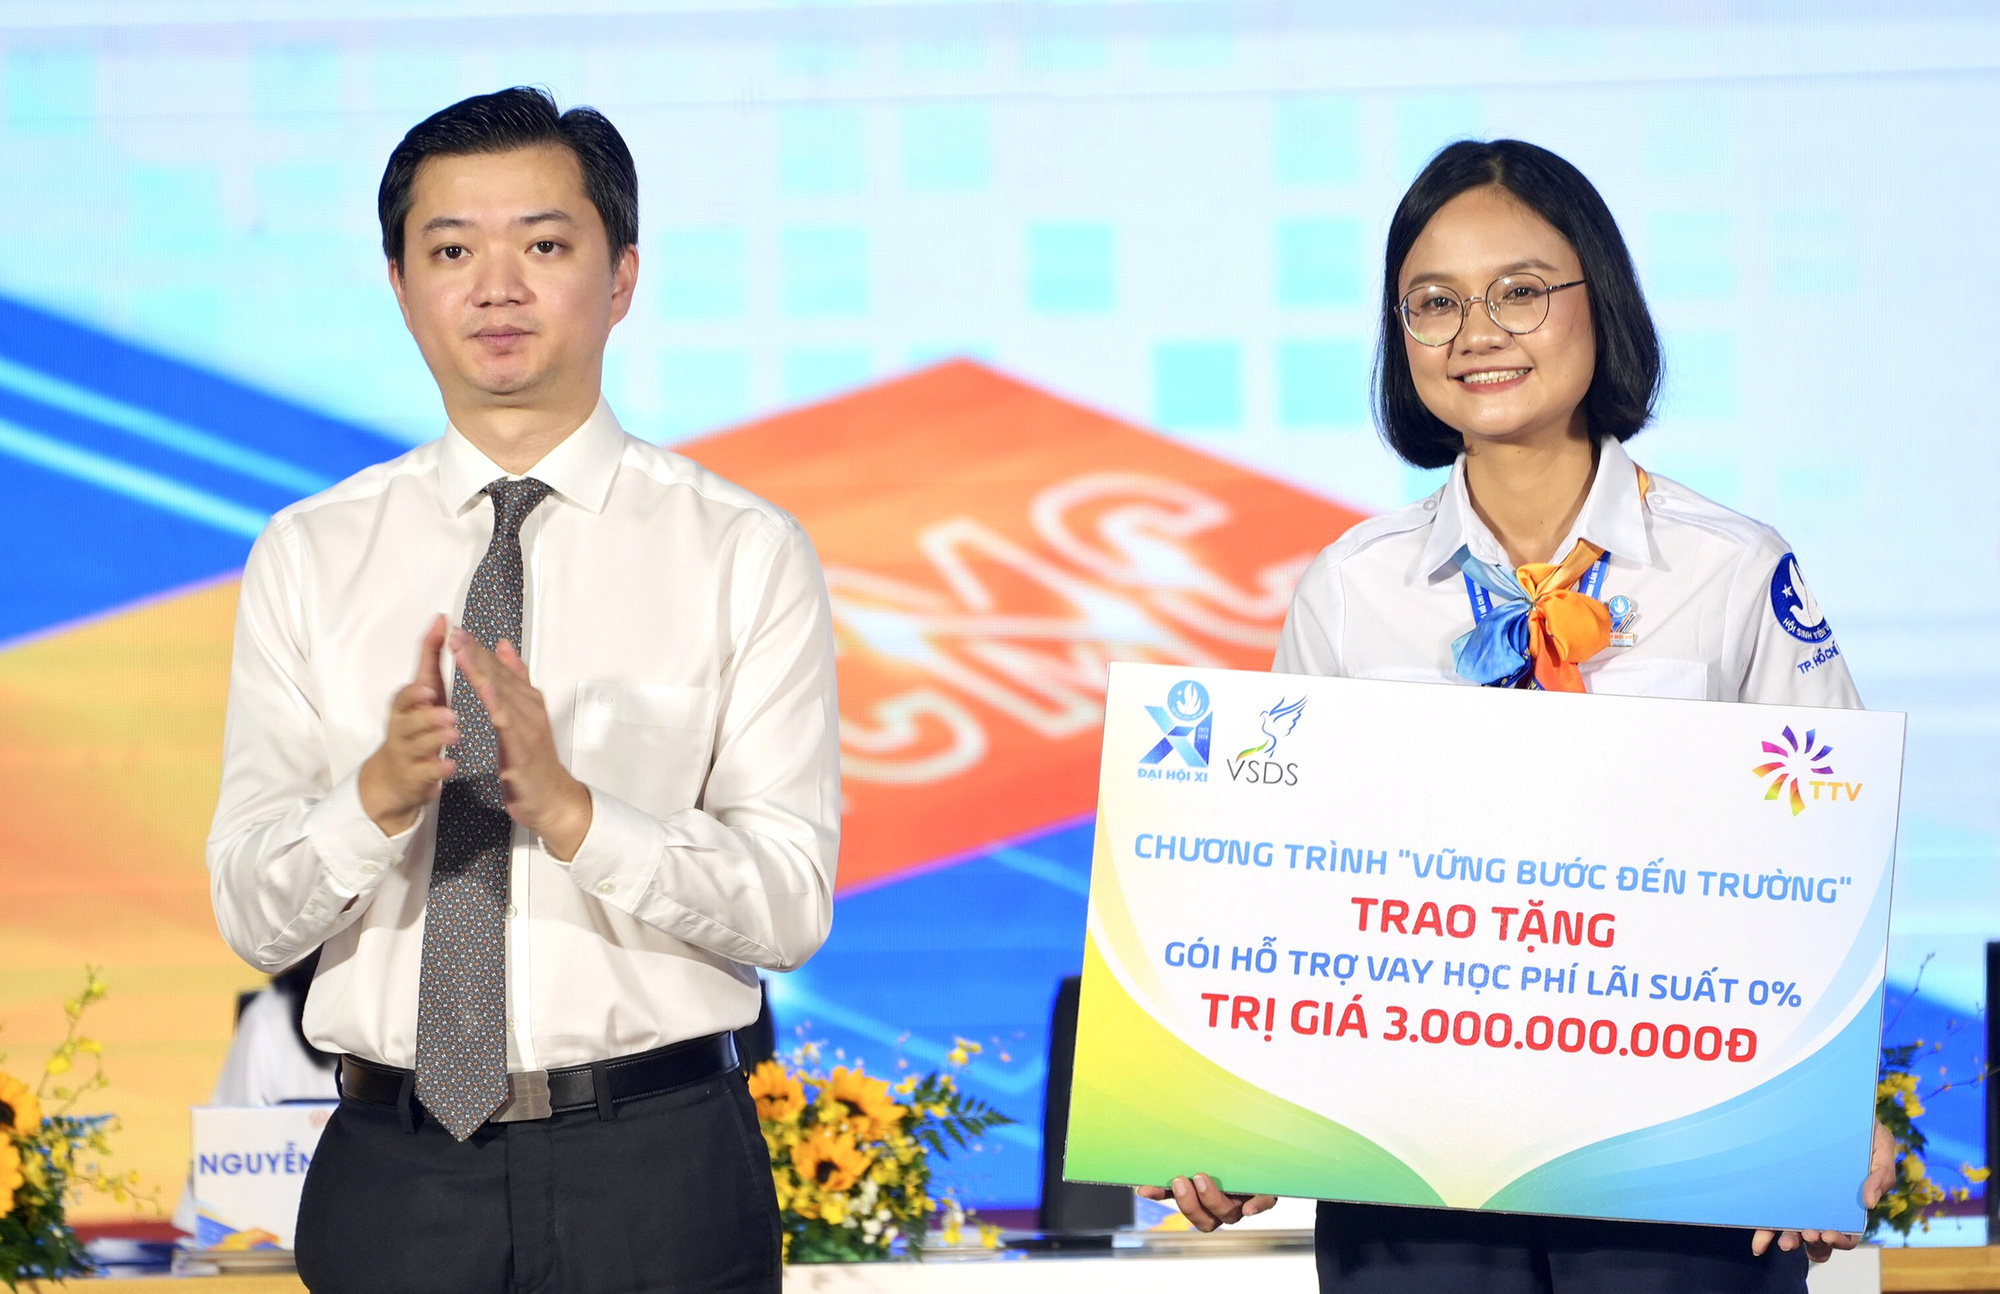 Vietnamese Student Association President Nguyen Minh Triet (left) awarded 3 billion VND to Ho Chi Minh City Student Association to implement 0% interest tuition loan support package - Photo: HUU Han